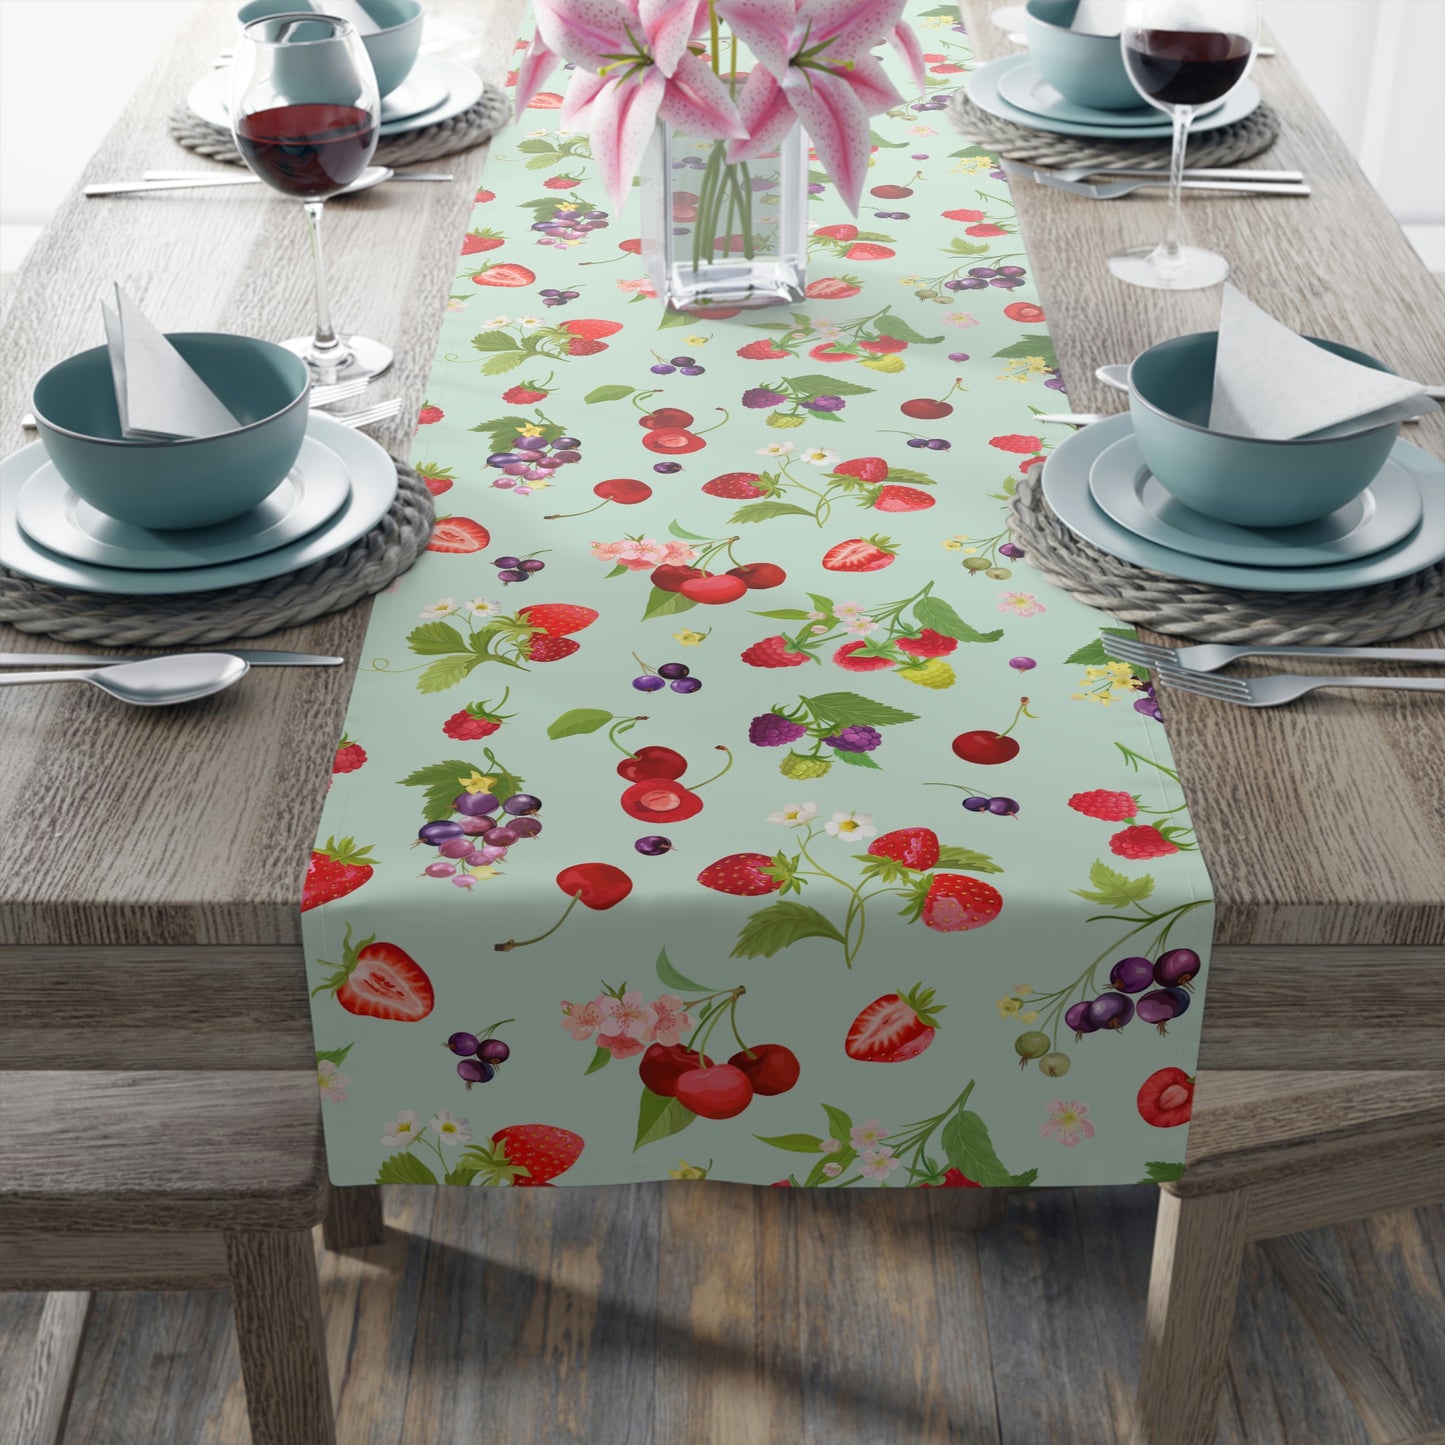 Cherries and Strawberries Table Runner (Cotton, Poly)